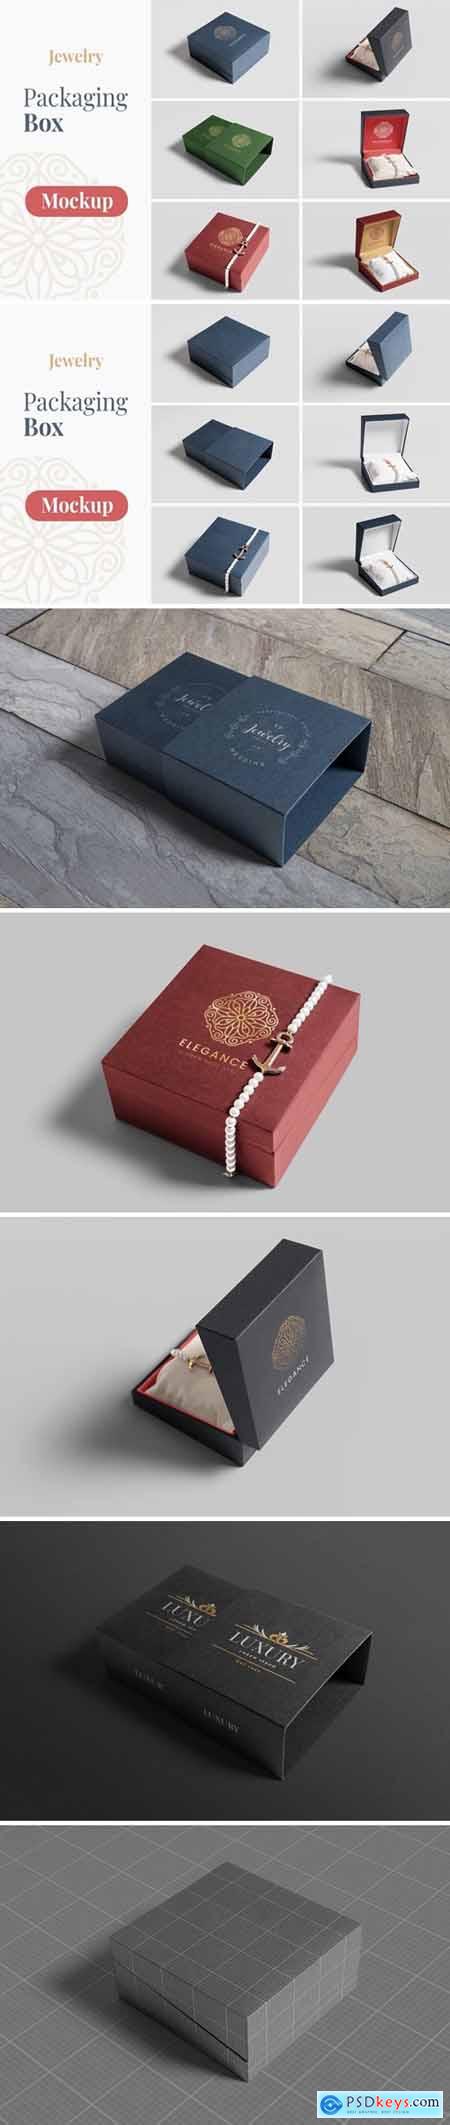 Jewelry Packaging Box Mockups 4554066